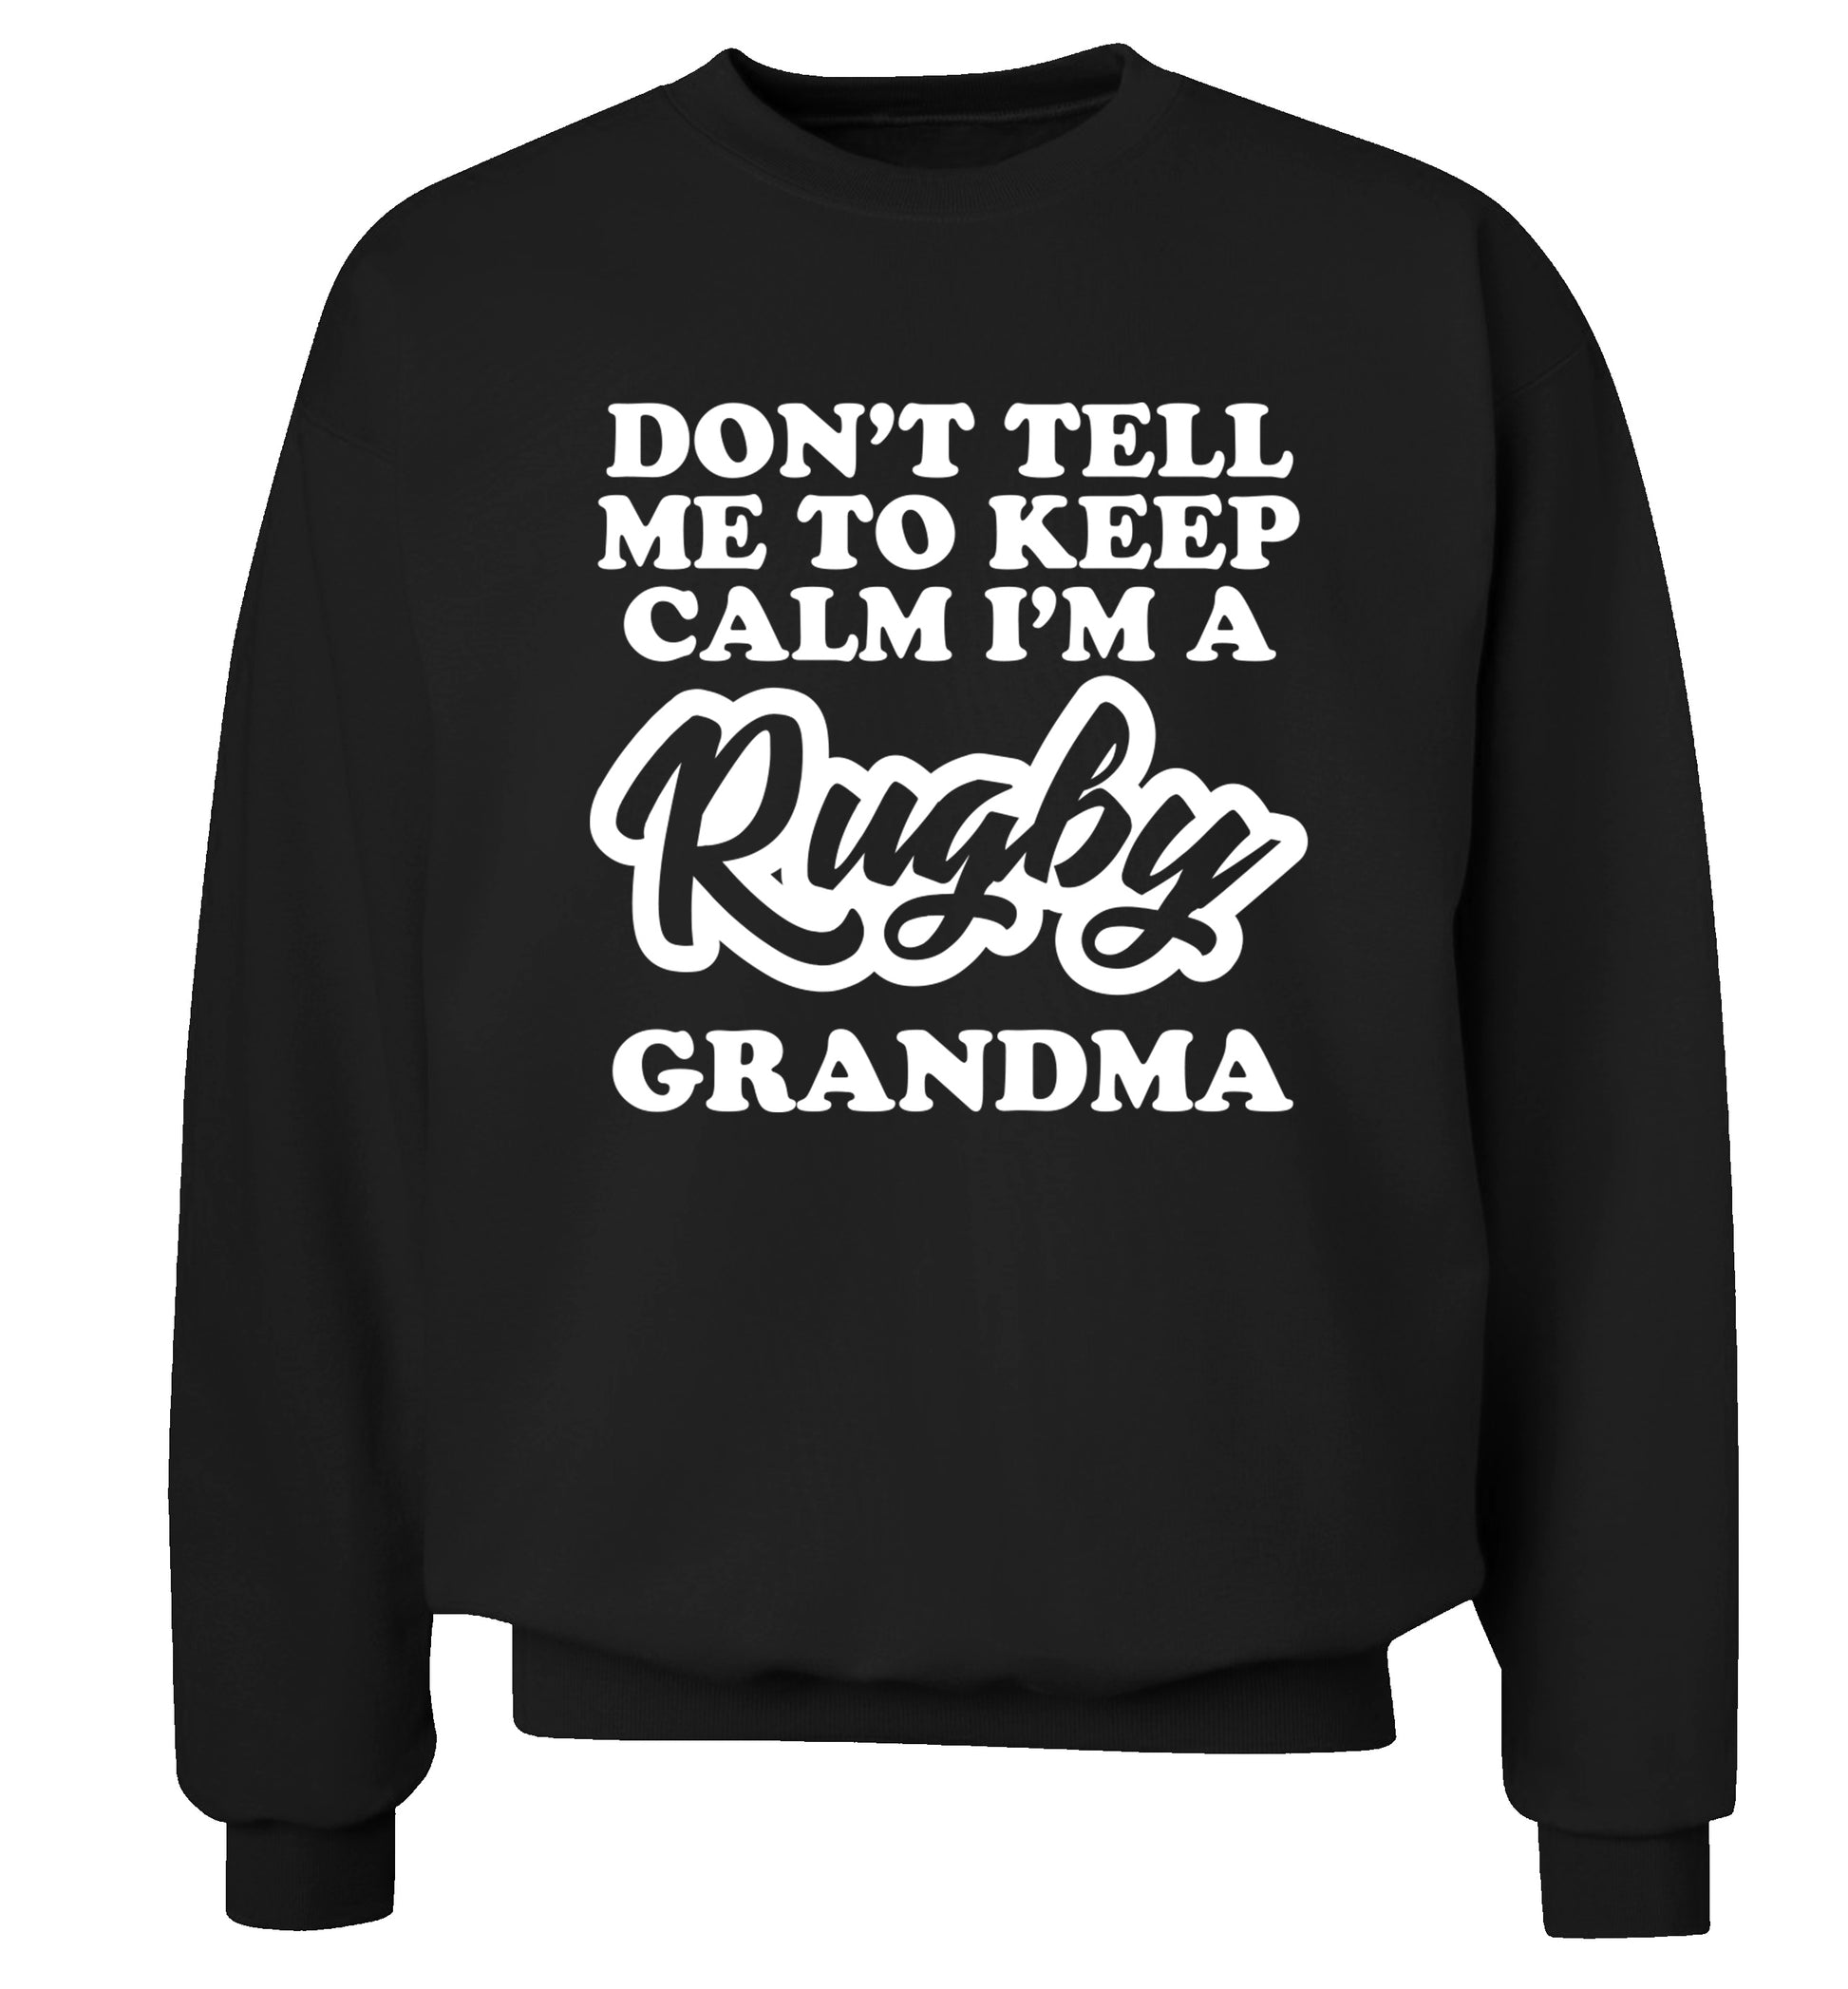 Don't tell me to keep calm I'm a rugby grandma Adult's unisex black Sweater 2XL